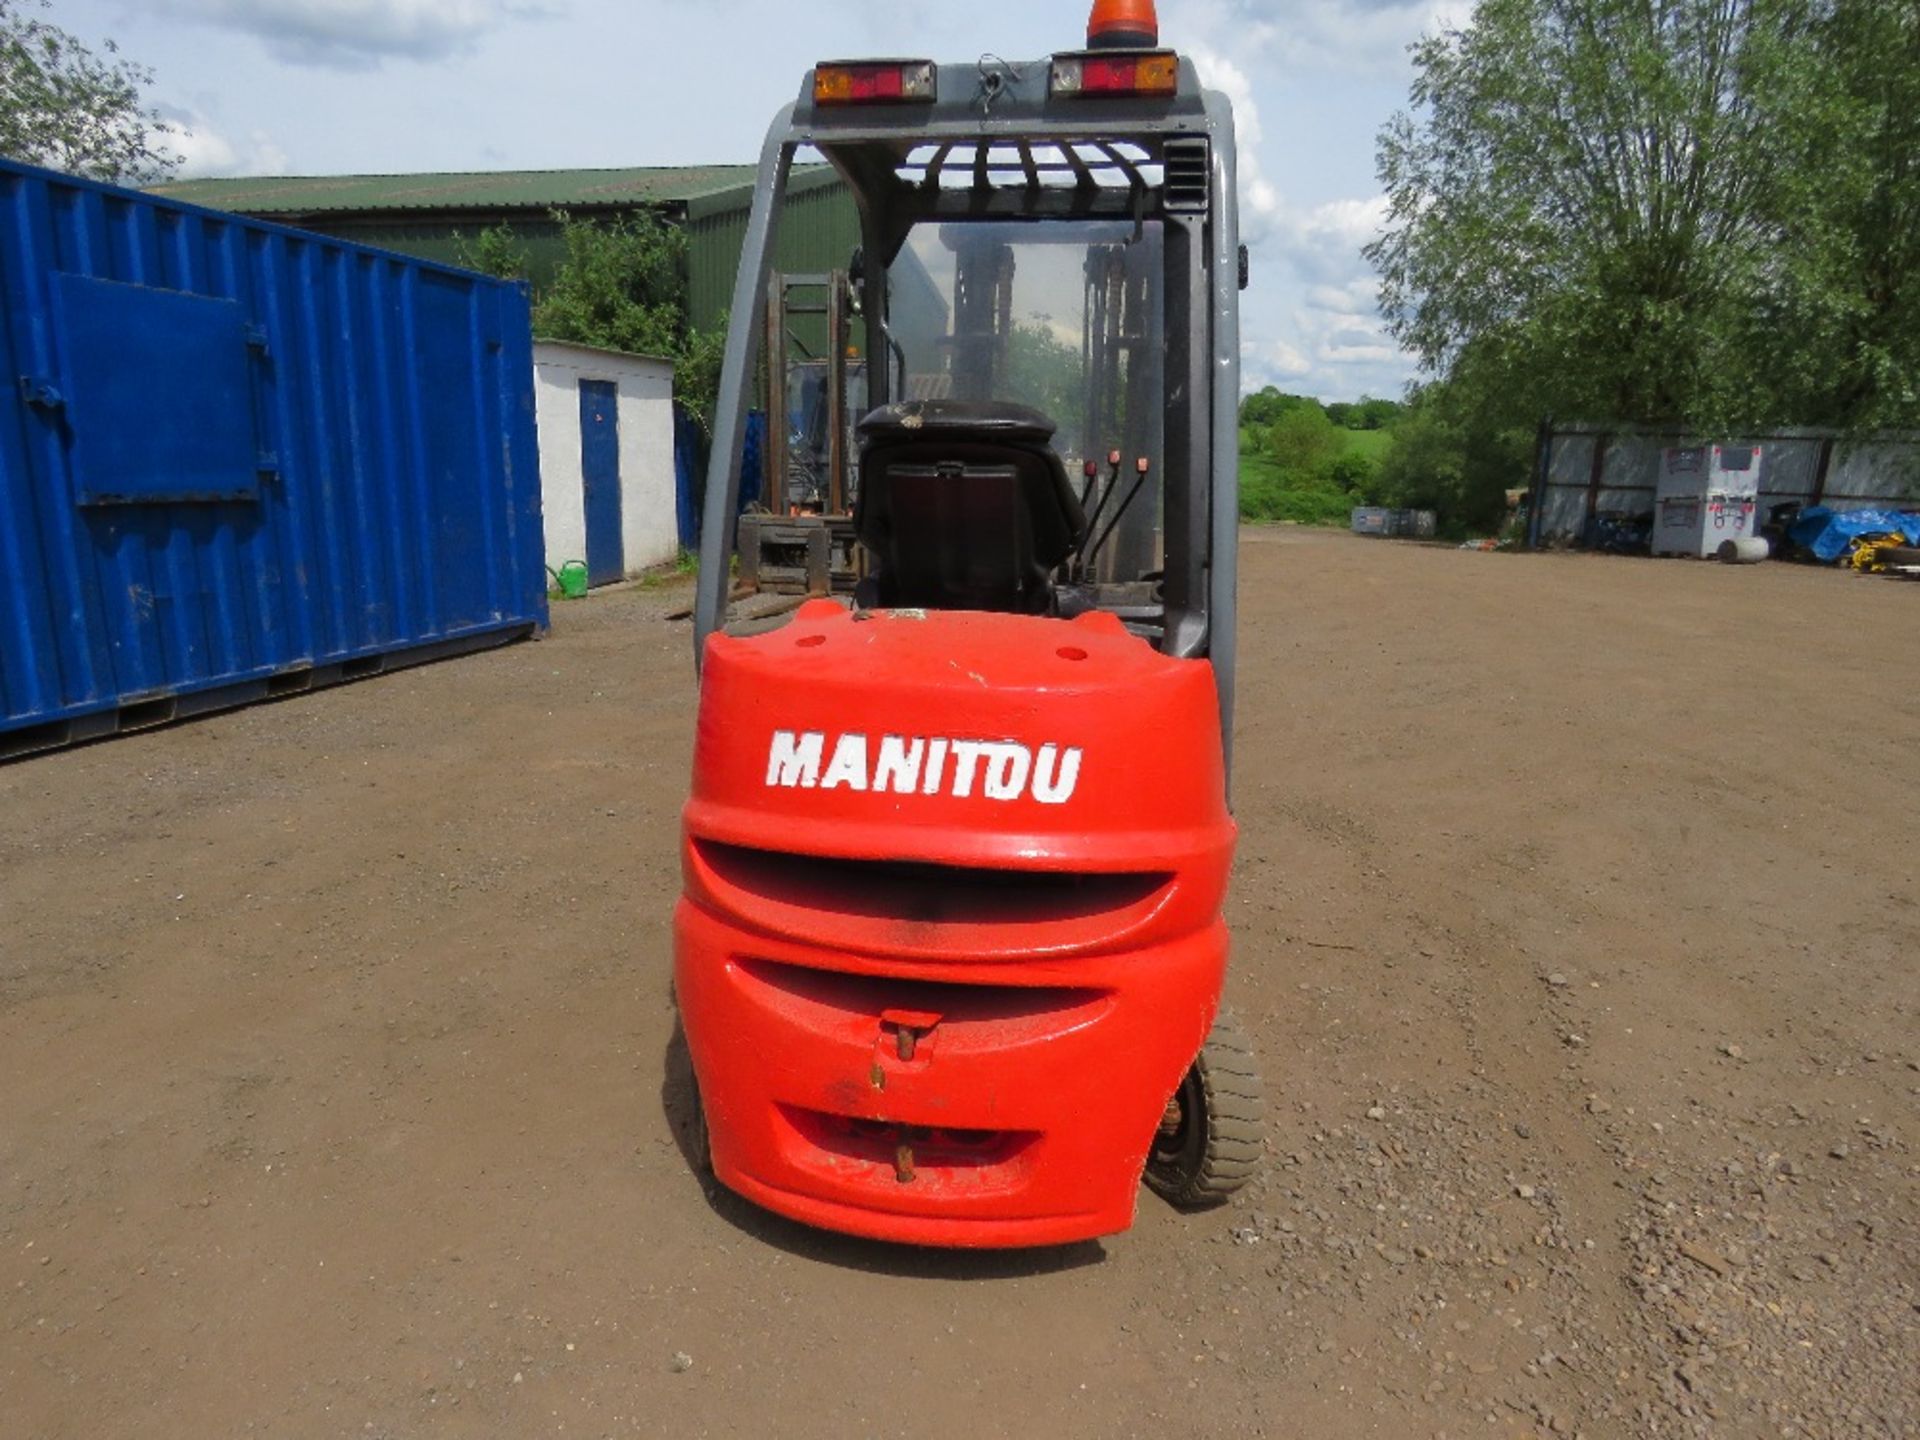 MANITOU MI 18D DIESEL ENGINED FORKLIFT TRUCK, YEAR 2016. WHEN TESTED WAS SEEN TO DRIVE, STEER AND BR - Image 4 of 10